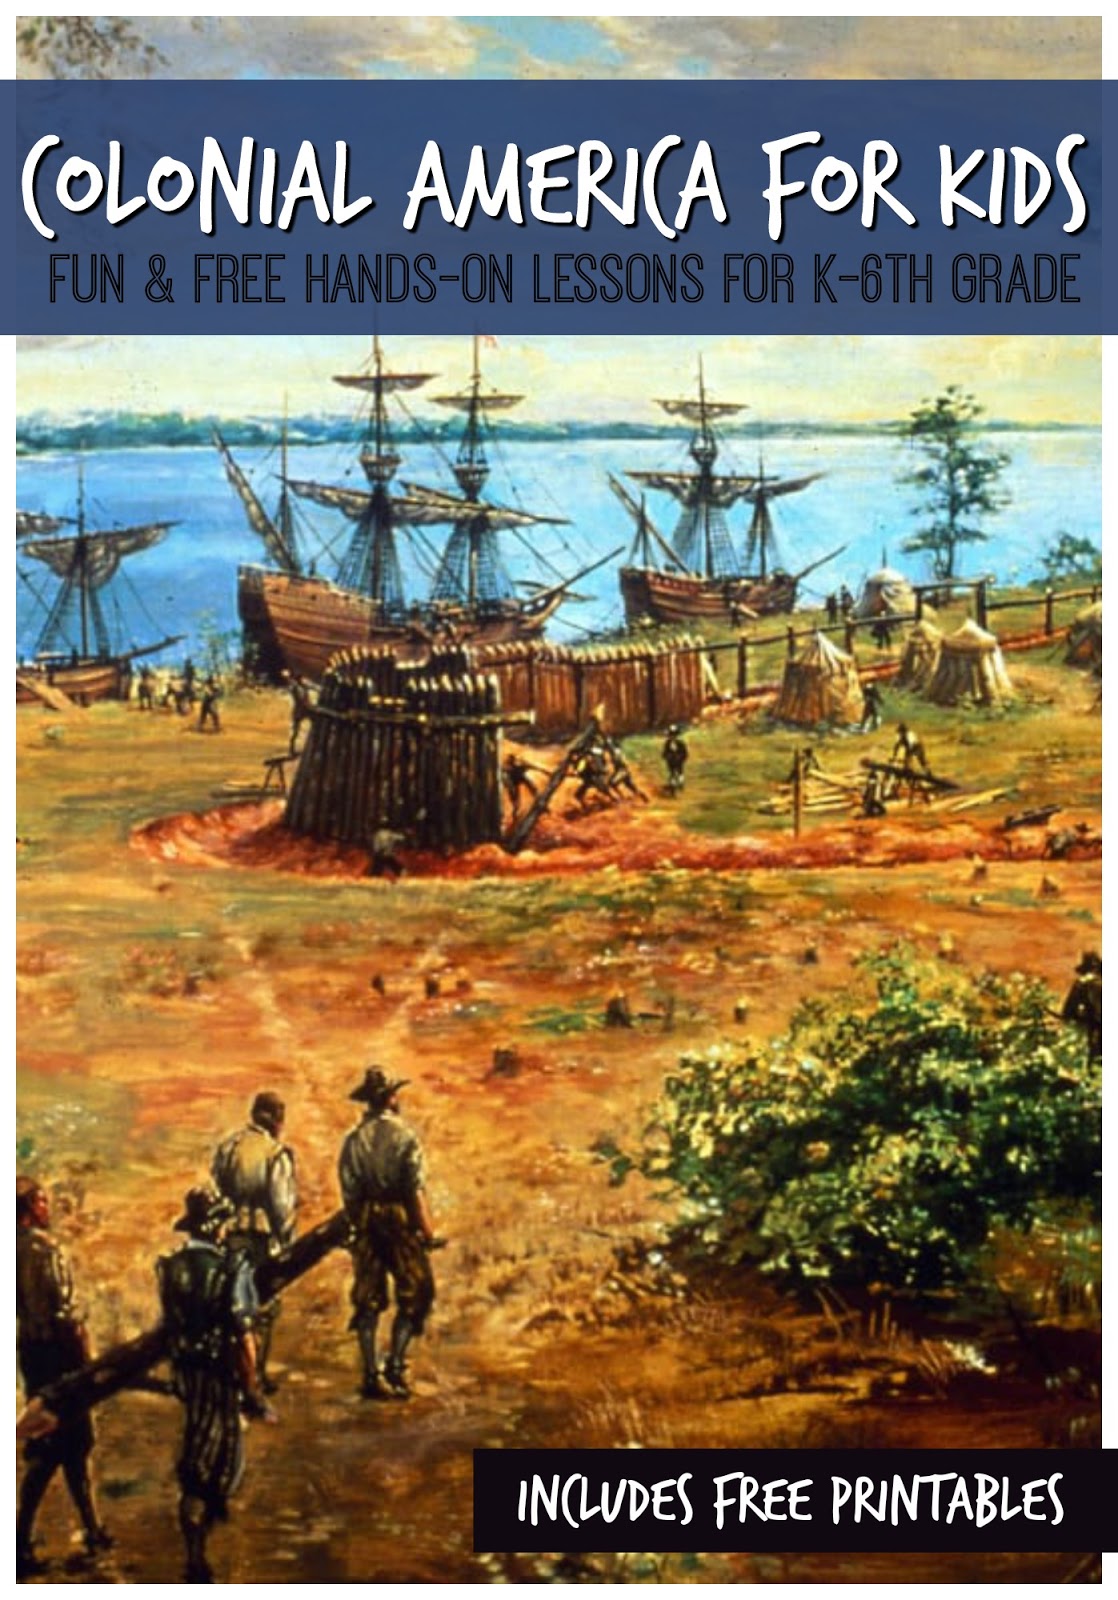 Colonial America for Kids